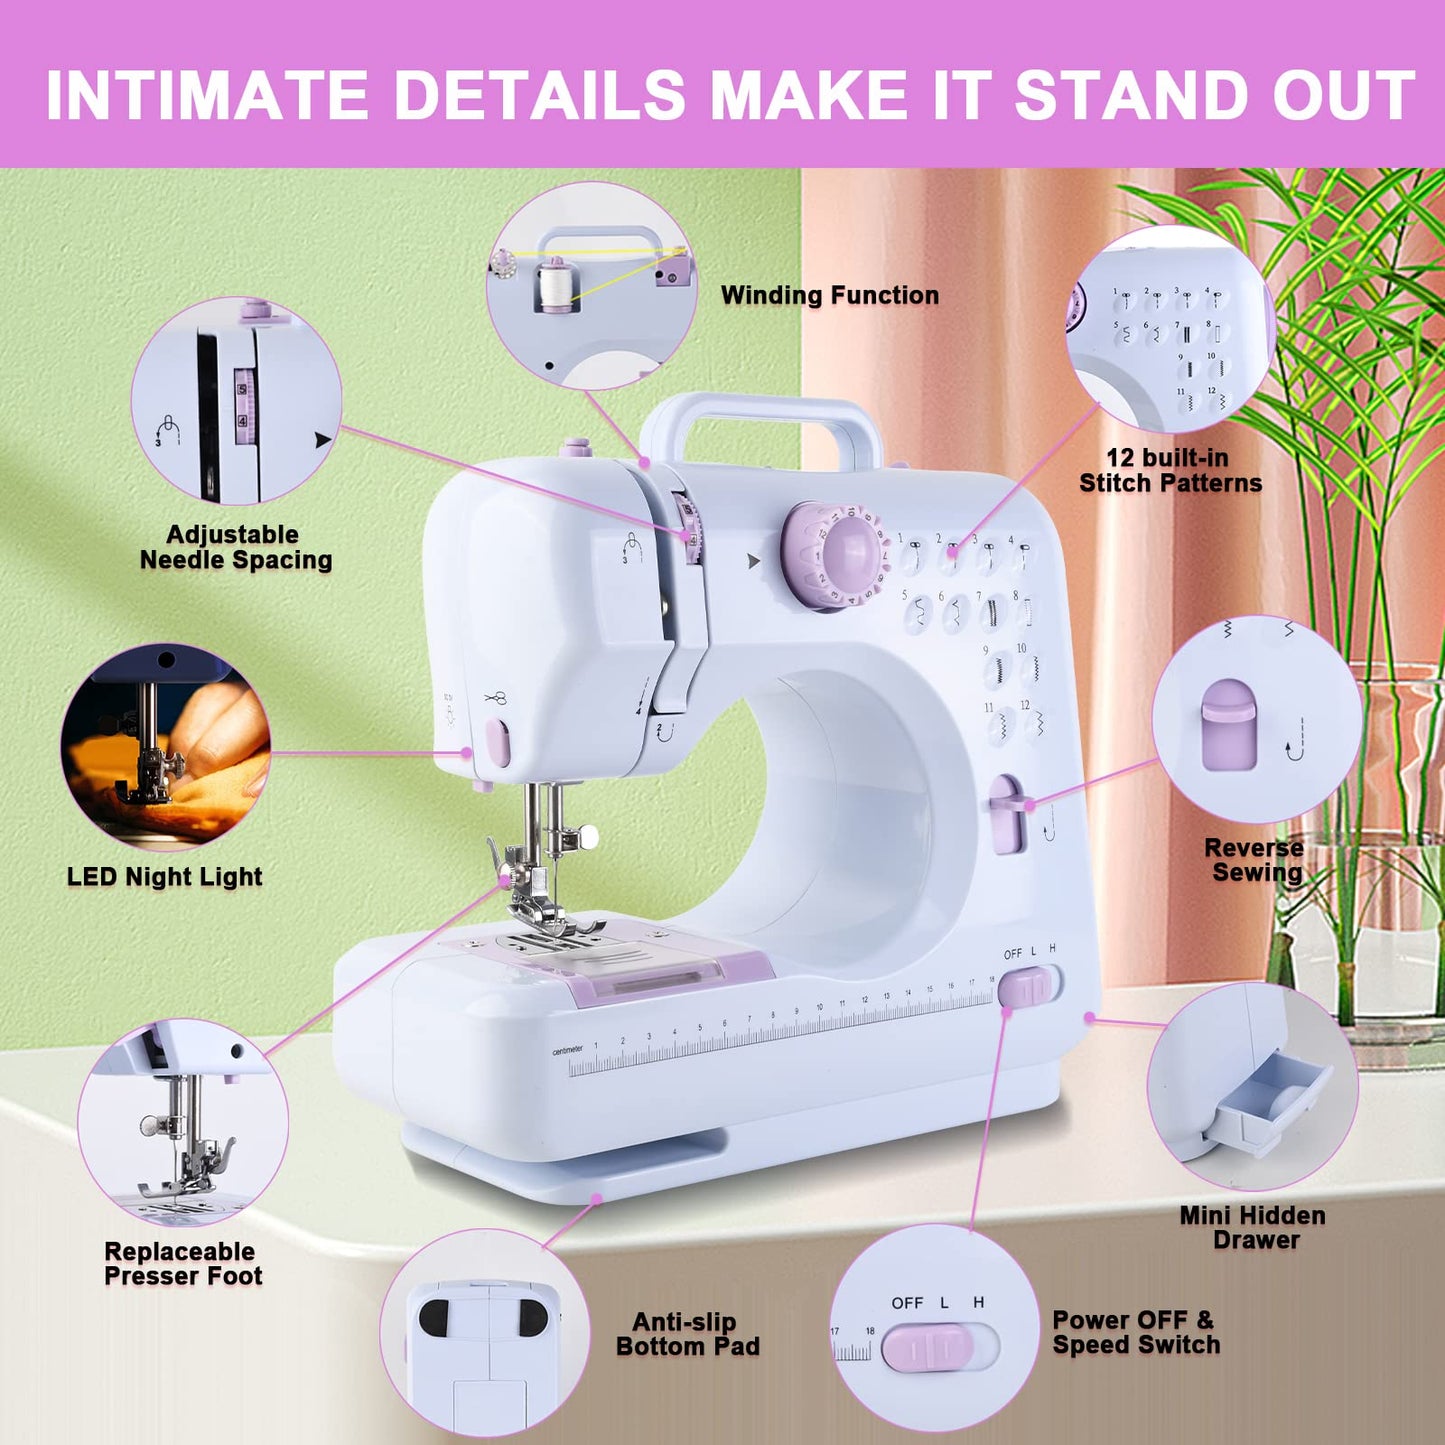 JUCVNB Mini Sewing Machine for Beginners and Kids Ages 8-12, Portable Sewing Machines with 12 Built-in Stitch Patterns, Light, 2 Speed Foot Pedal - Purple & White (with 27 Pieces Accessory Kit & Case)